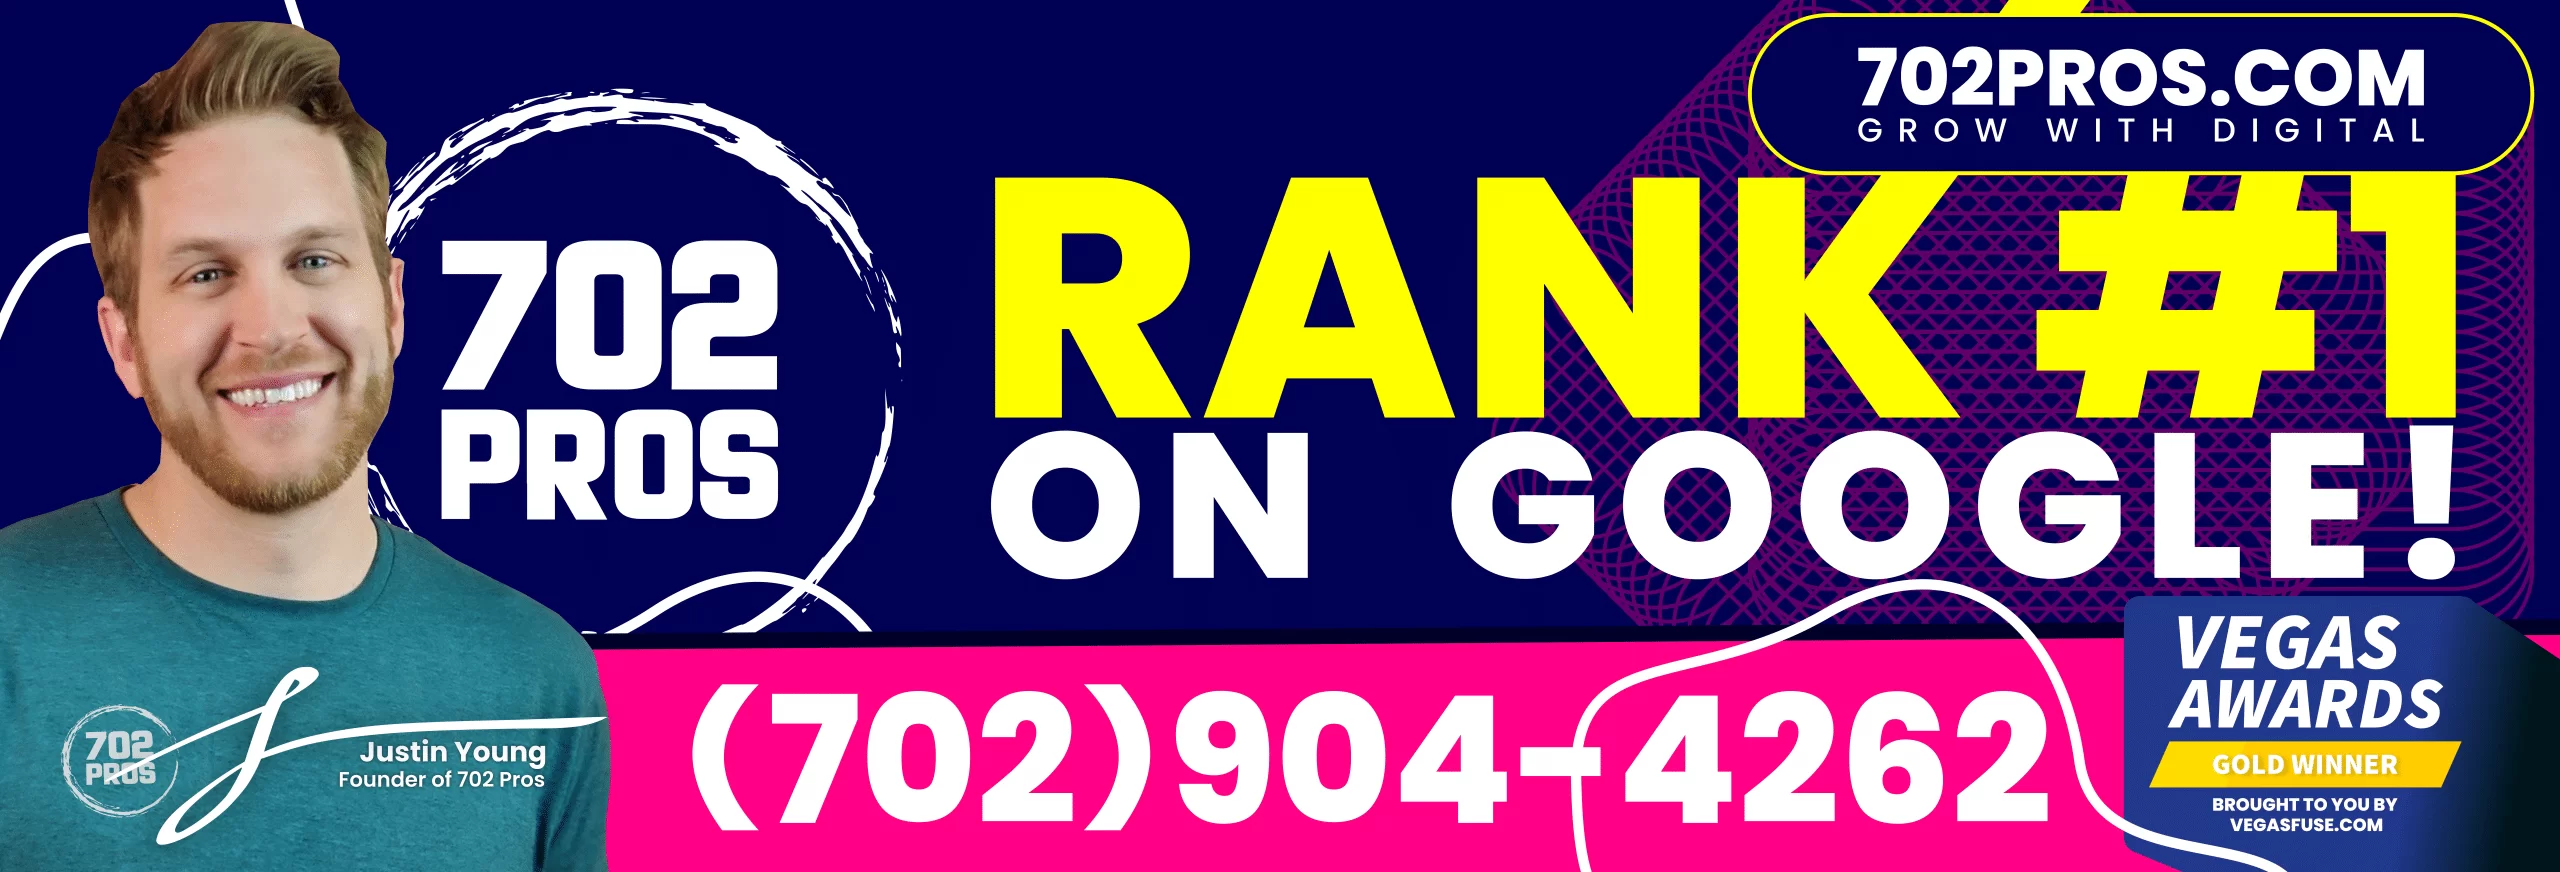 Rank with google billboard pink and yellow. Png